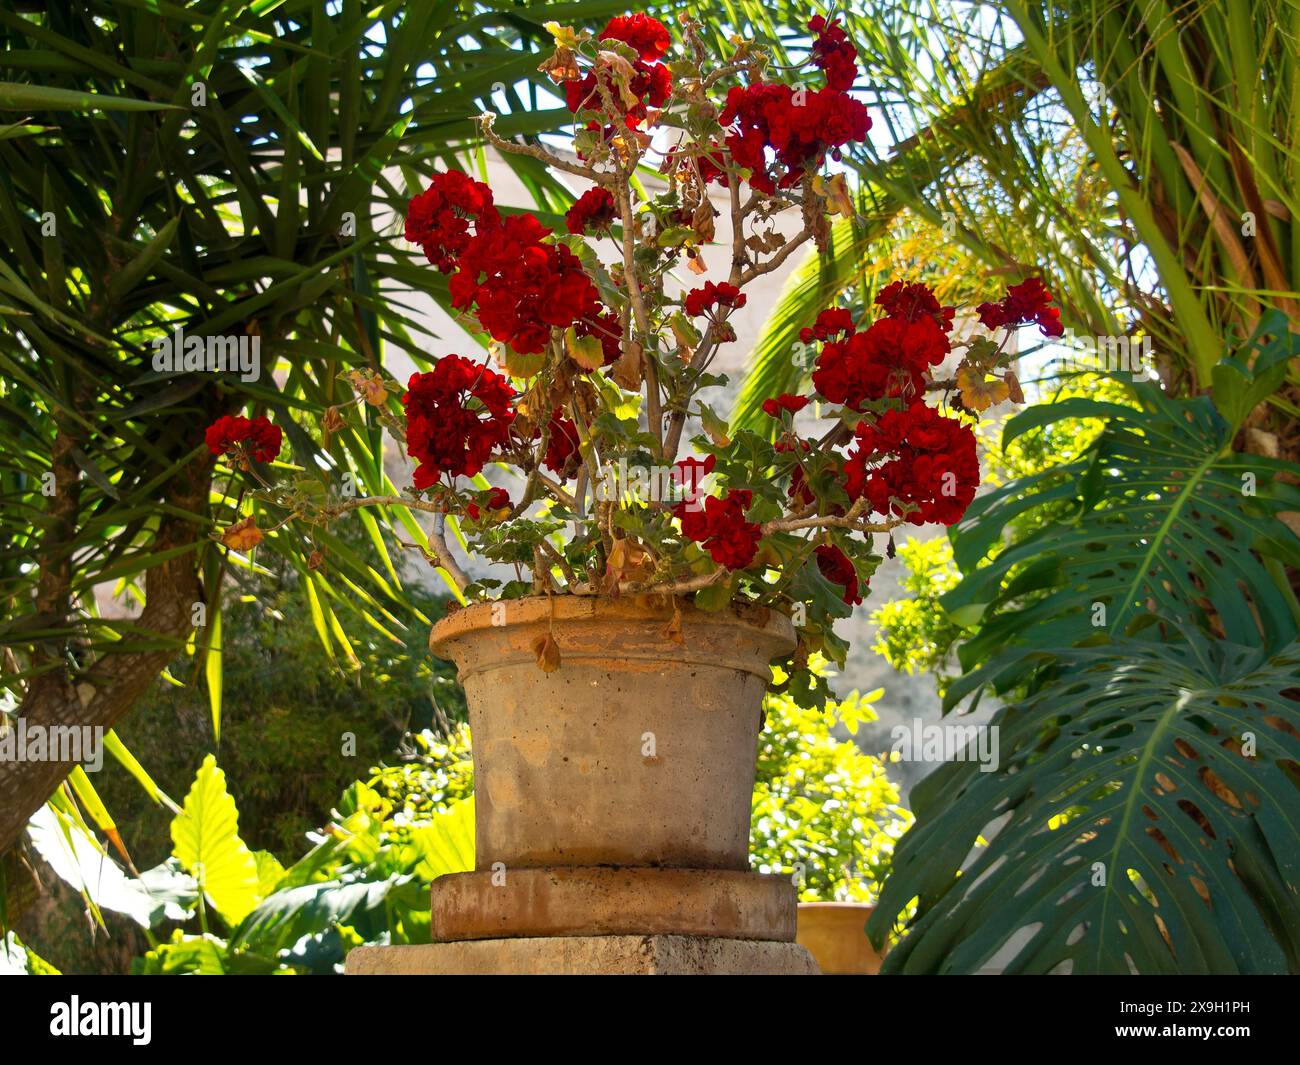 A flower pot with bright red flowers stands in a garden, surrounded by palm trees and green plants in the sunshine, palma de Majorca with its Stock Photo